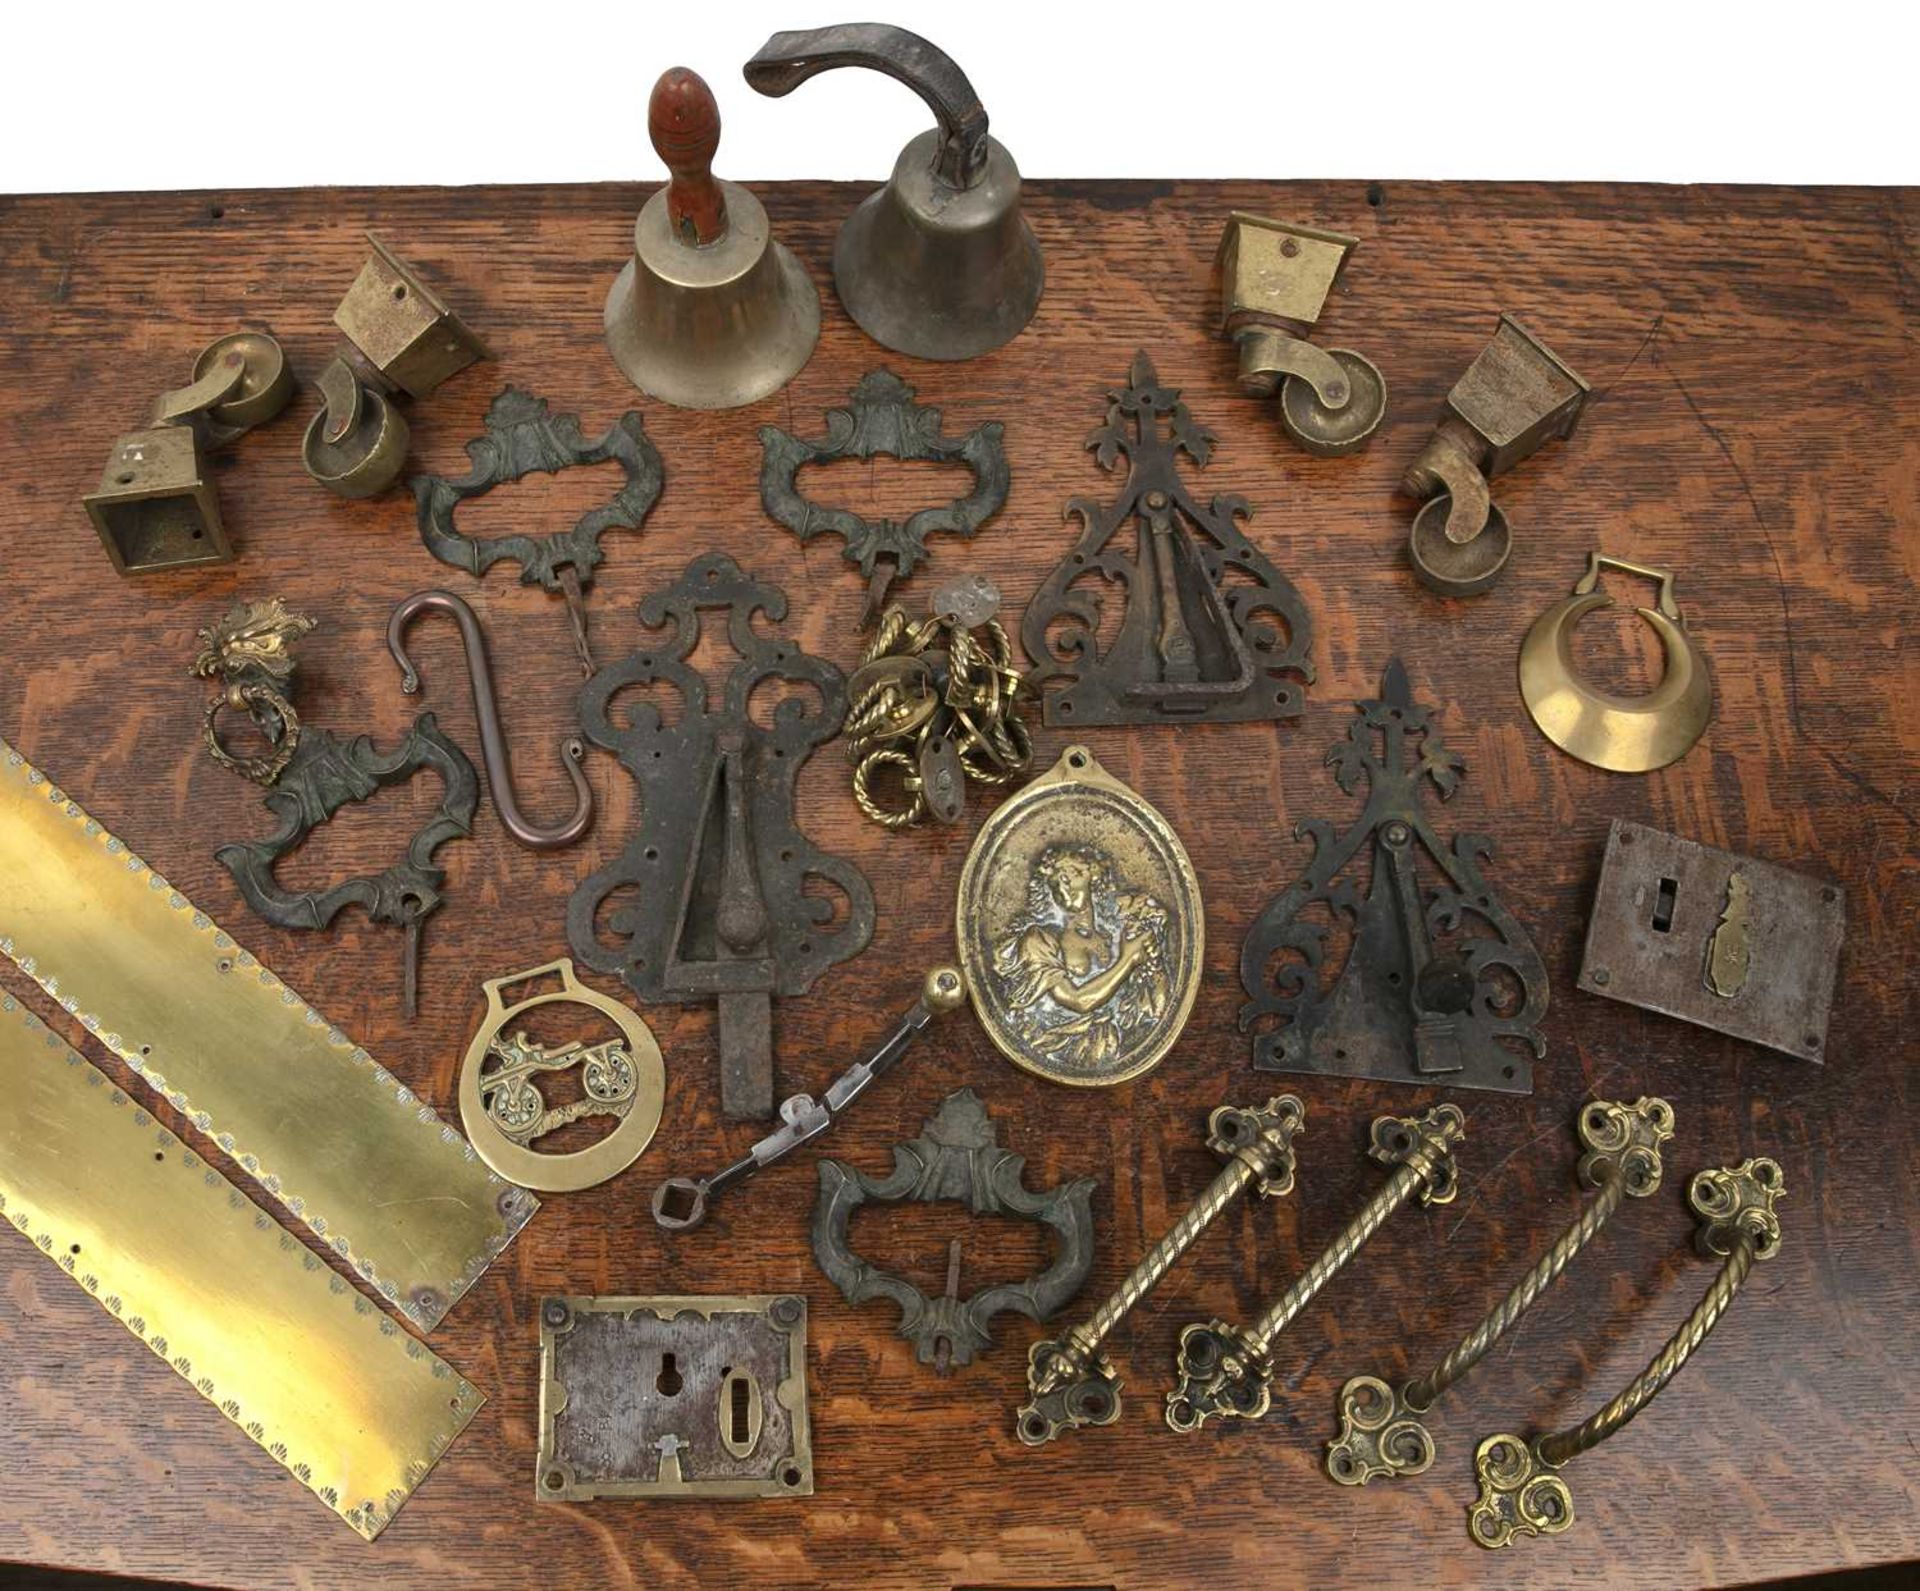 Group of metalware 19th Century and later, including brass locks, doorplates, castors, horse